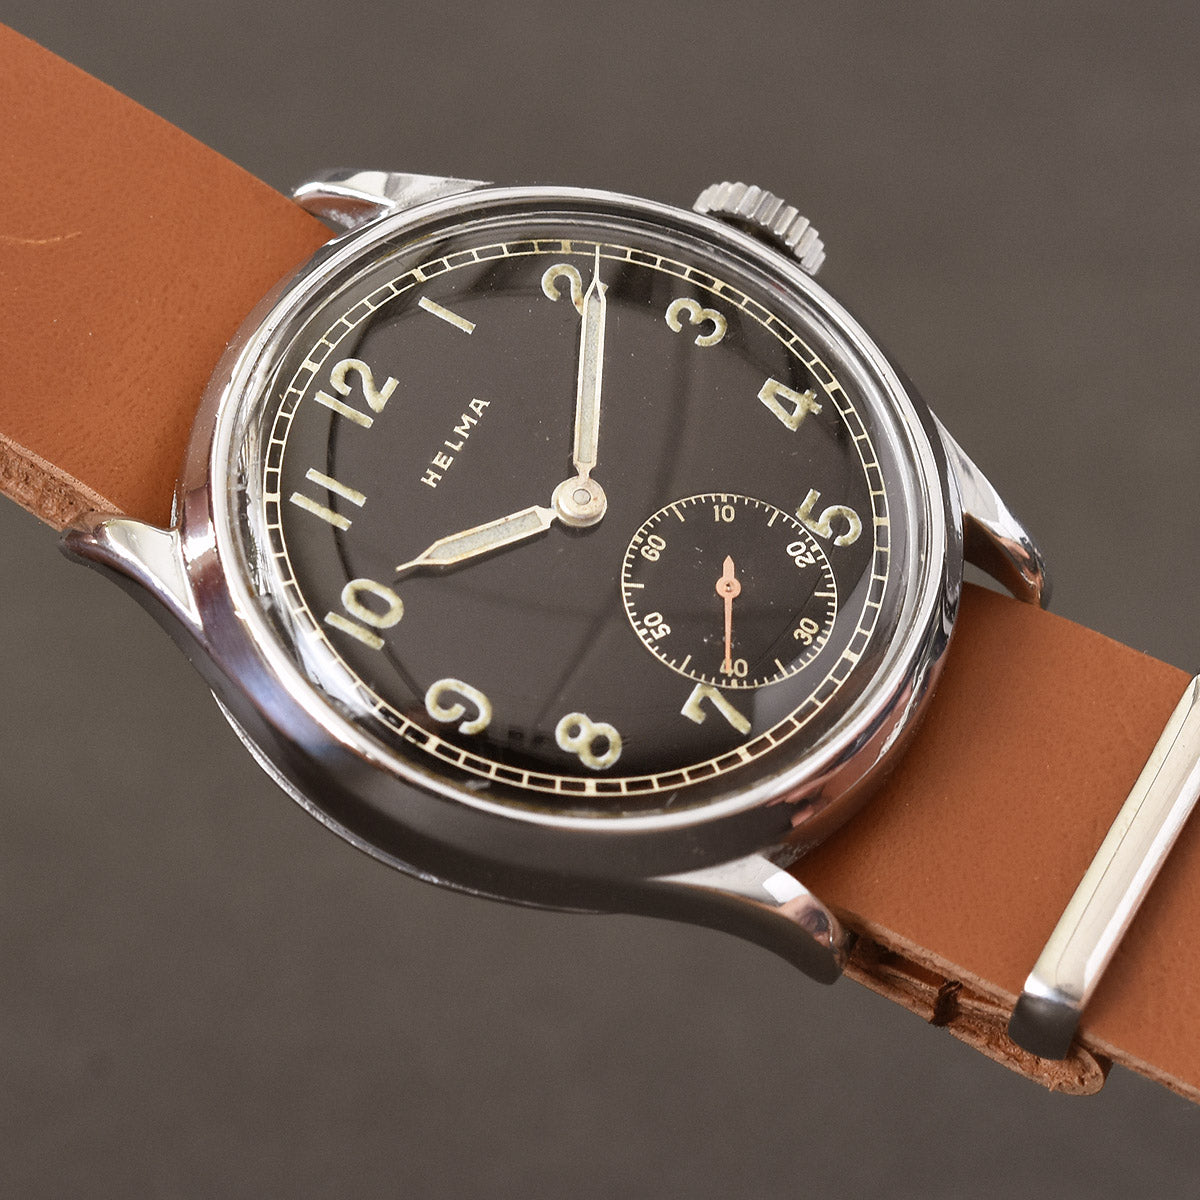 50s HELMA Wehrmachtswerk AS 1130 Gents Military Style Watch